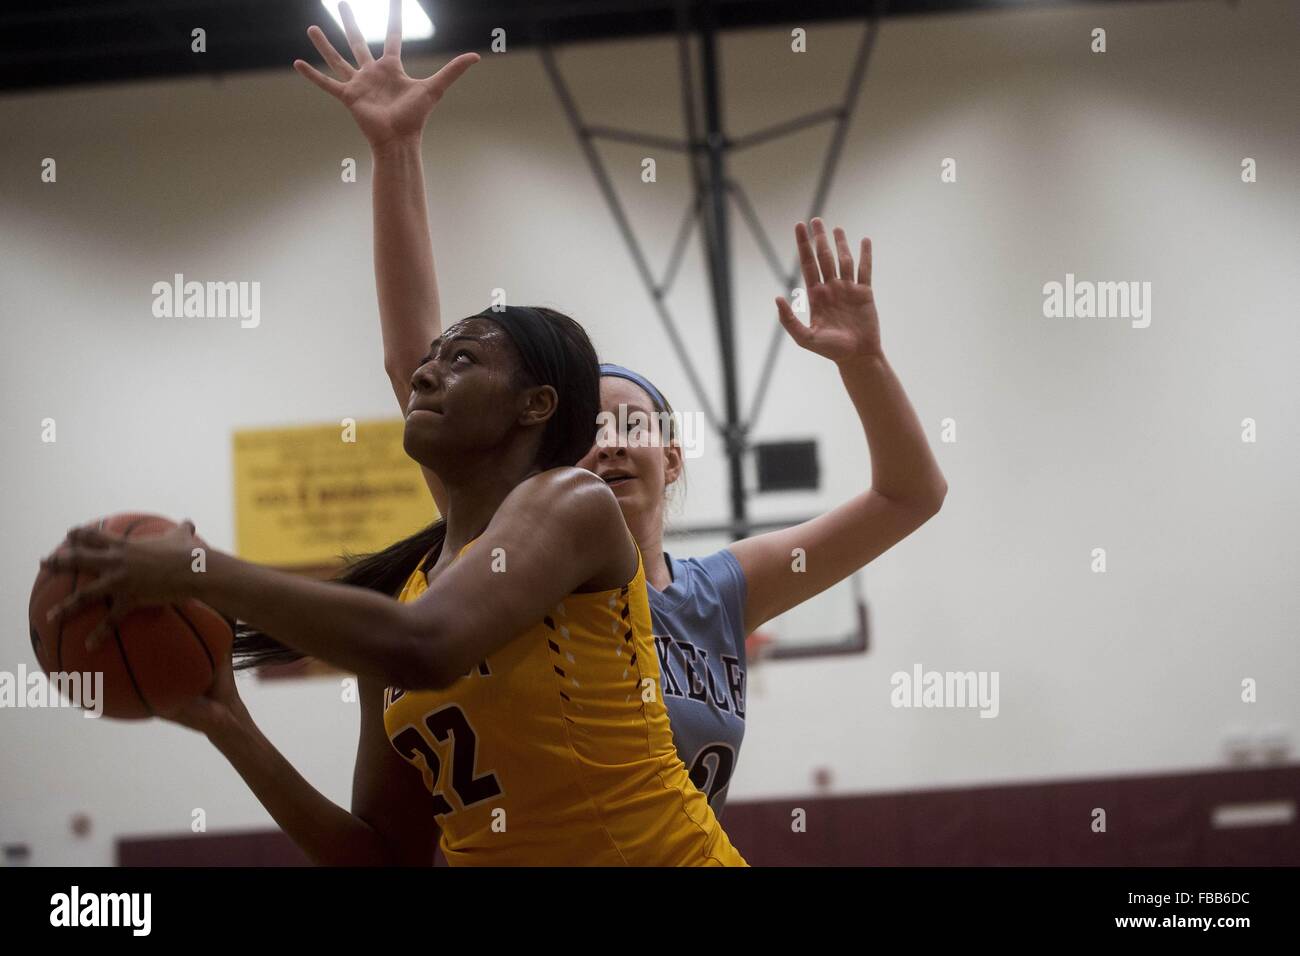 Florida, USA. 13th Jan, 2016. Zack Wittman | Times.Courtney Hall attempts to shoot during Berkeley Preparatory's game at Brooks Debartolo Collegiate High School on Wednesday evening, January 13, 2015 in Tampa. © Tampa Bay Times/ZUMA Wire/Alamy Live News Stock Photo